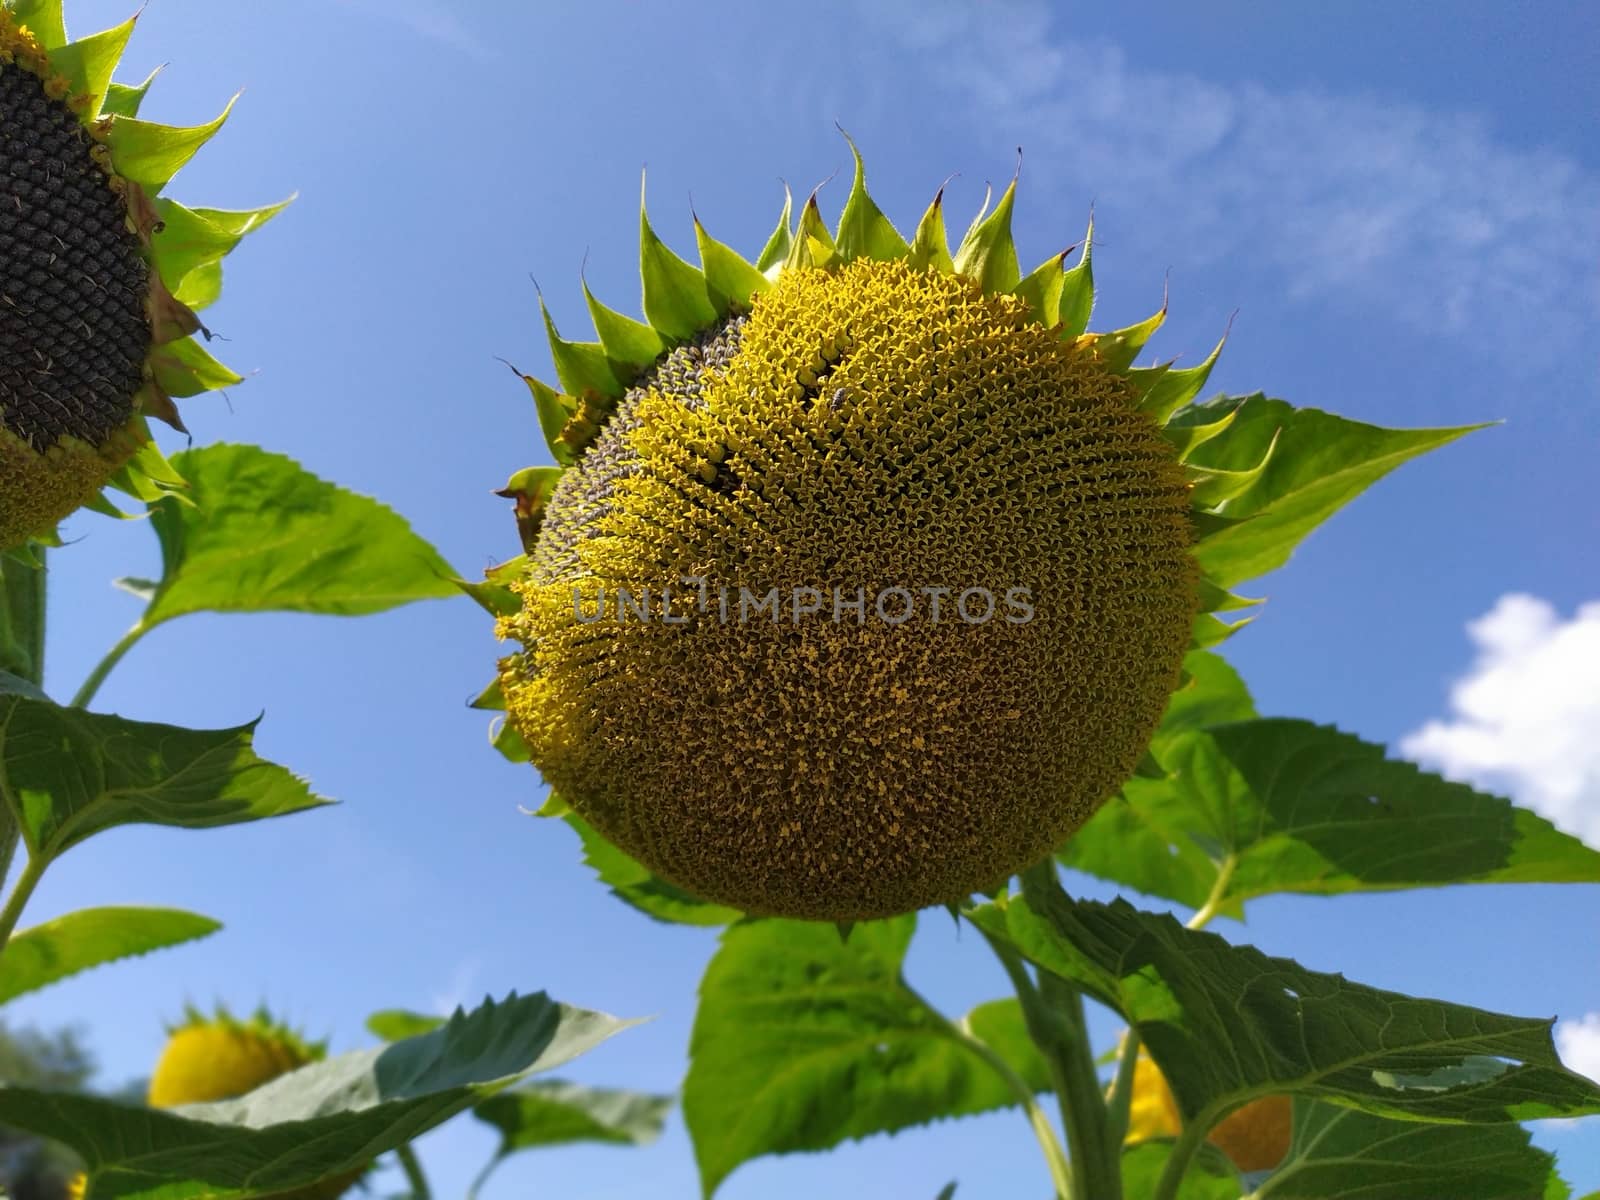 blooming sunflowers in the bright sunny day with blue sky in the background by marynkin